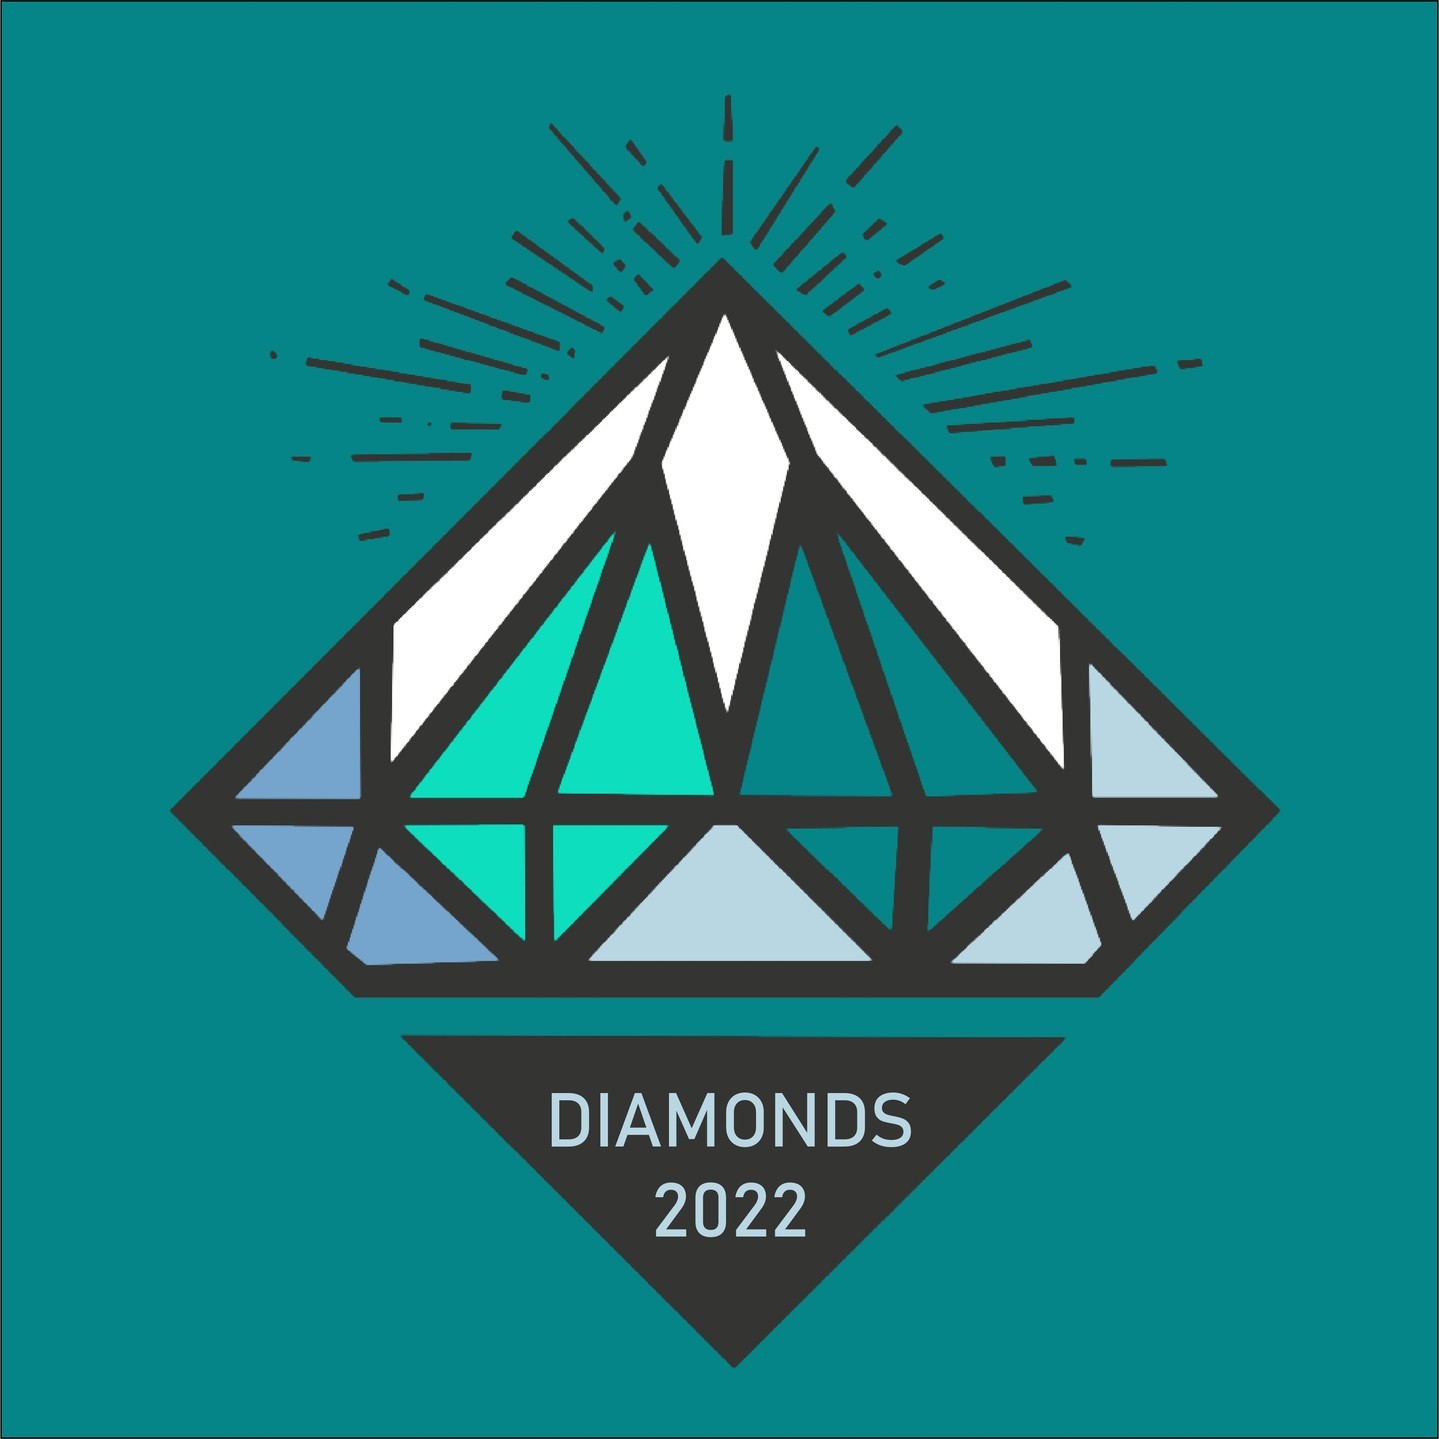 Diamonds 2022: Connected is coming soon! I’m so excited about this resource. Diamonds is a FREE online conference for chronically ill Christians, and on January 28th-30th, sixteen speakers will share encouragement and hope. This event’s theme is Connected, with encouragement for the loneliness and practical advice for impacting your community despite health challenges. See all the details at the link in my bio!
#Diamonds2022  #chronicillness #encouragement